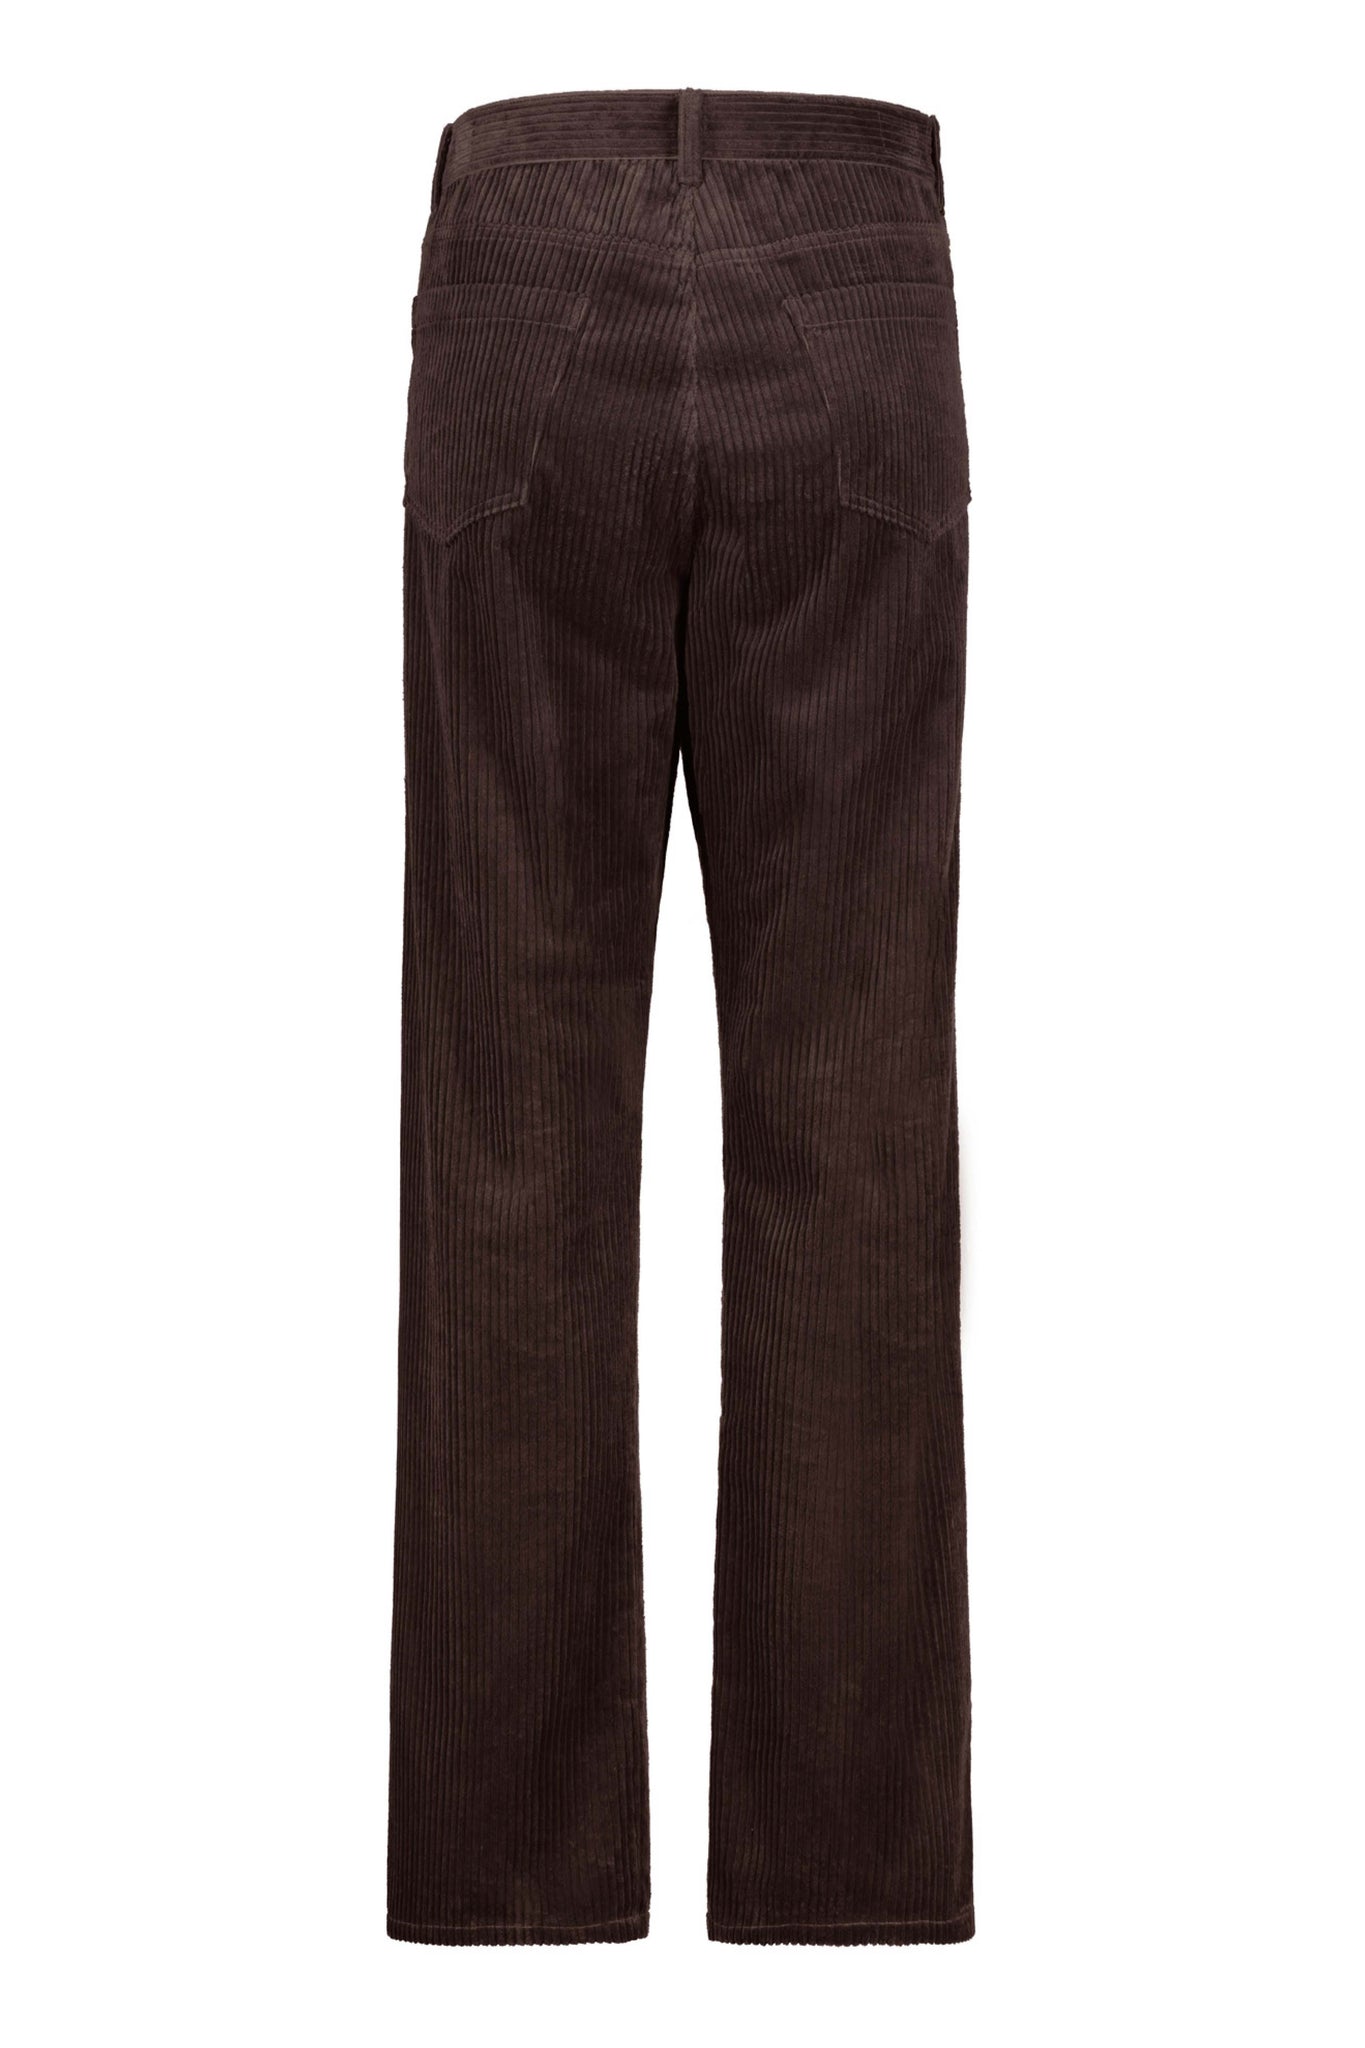 Harry trousers brown